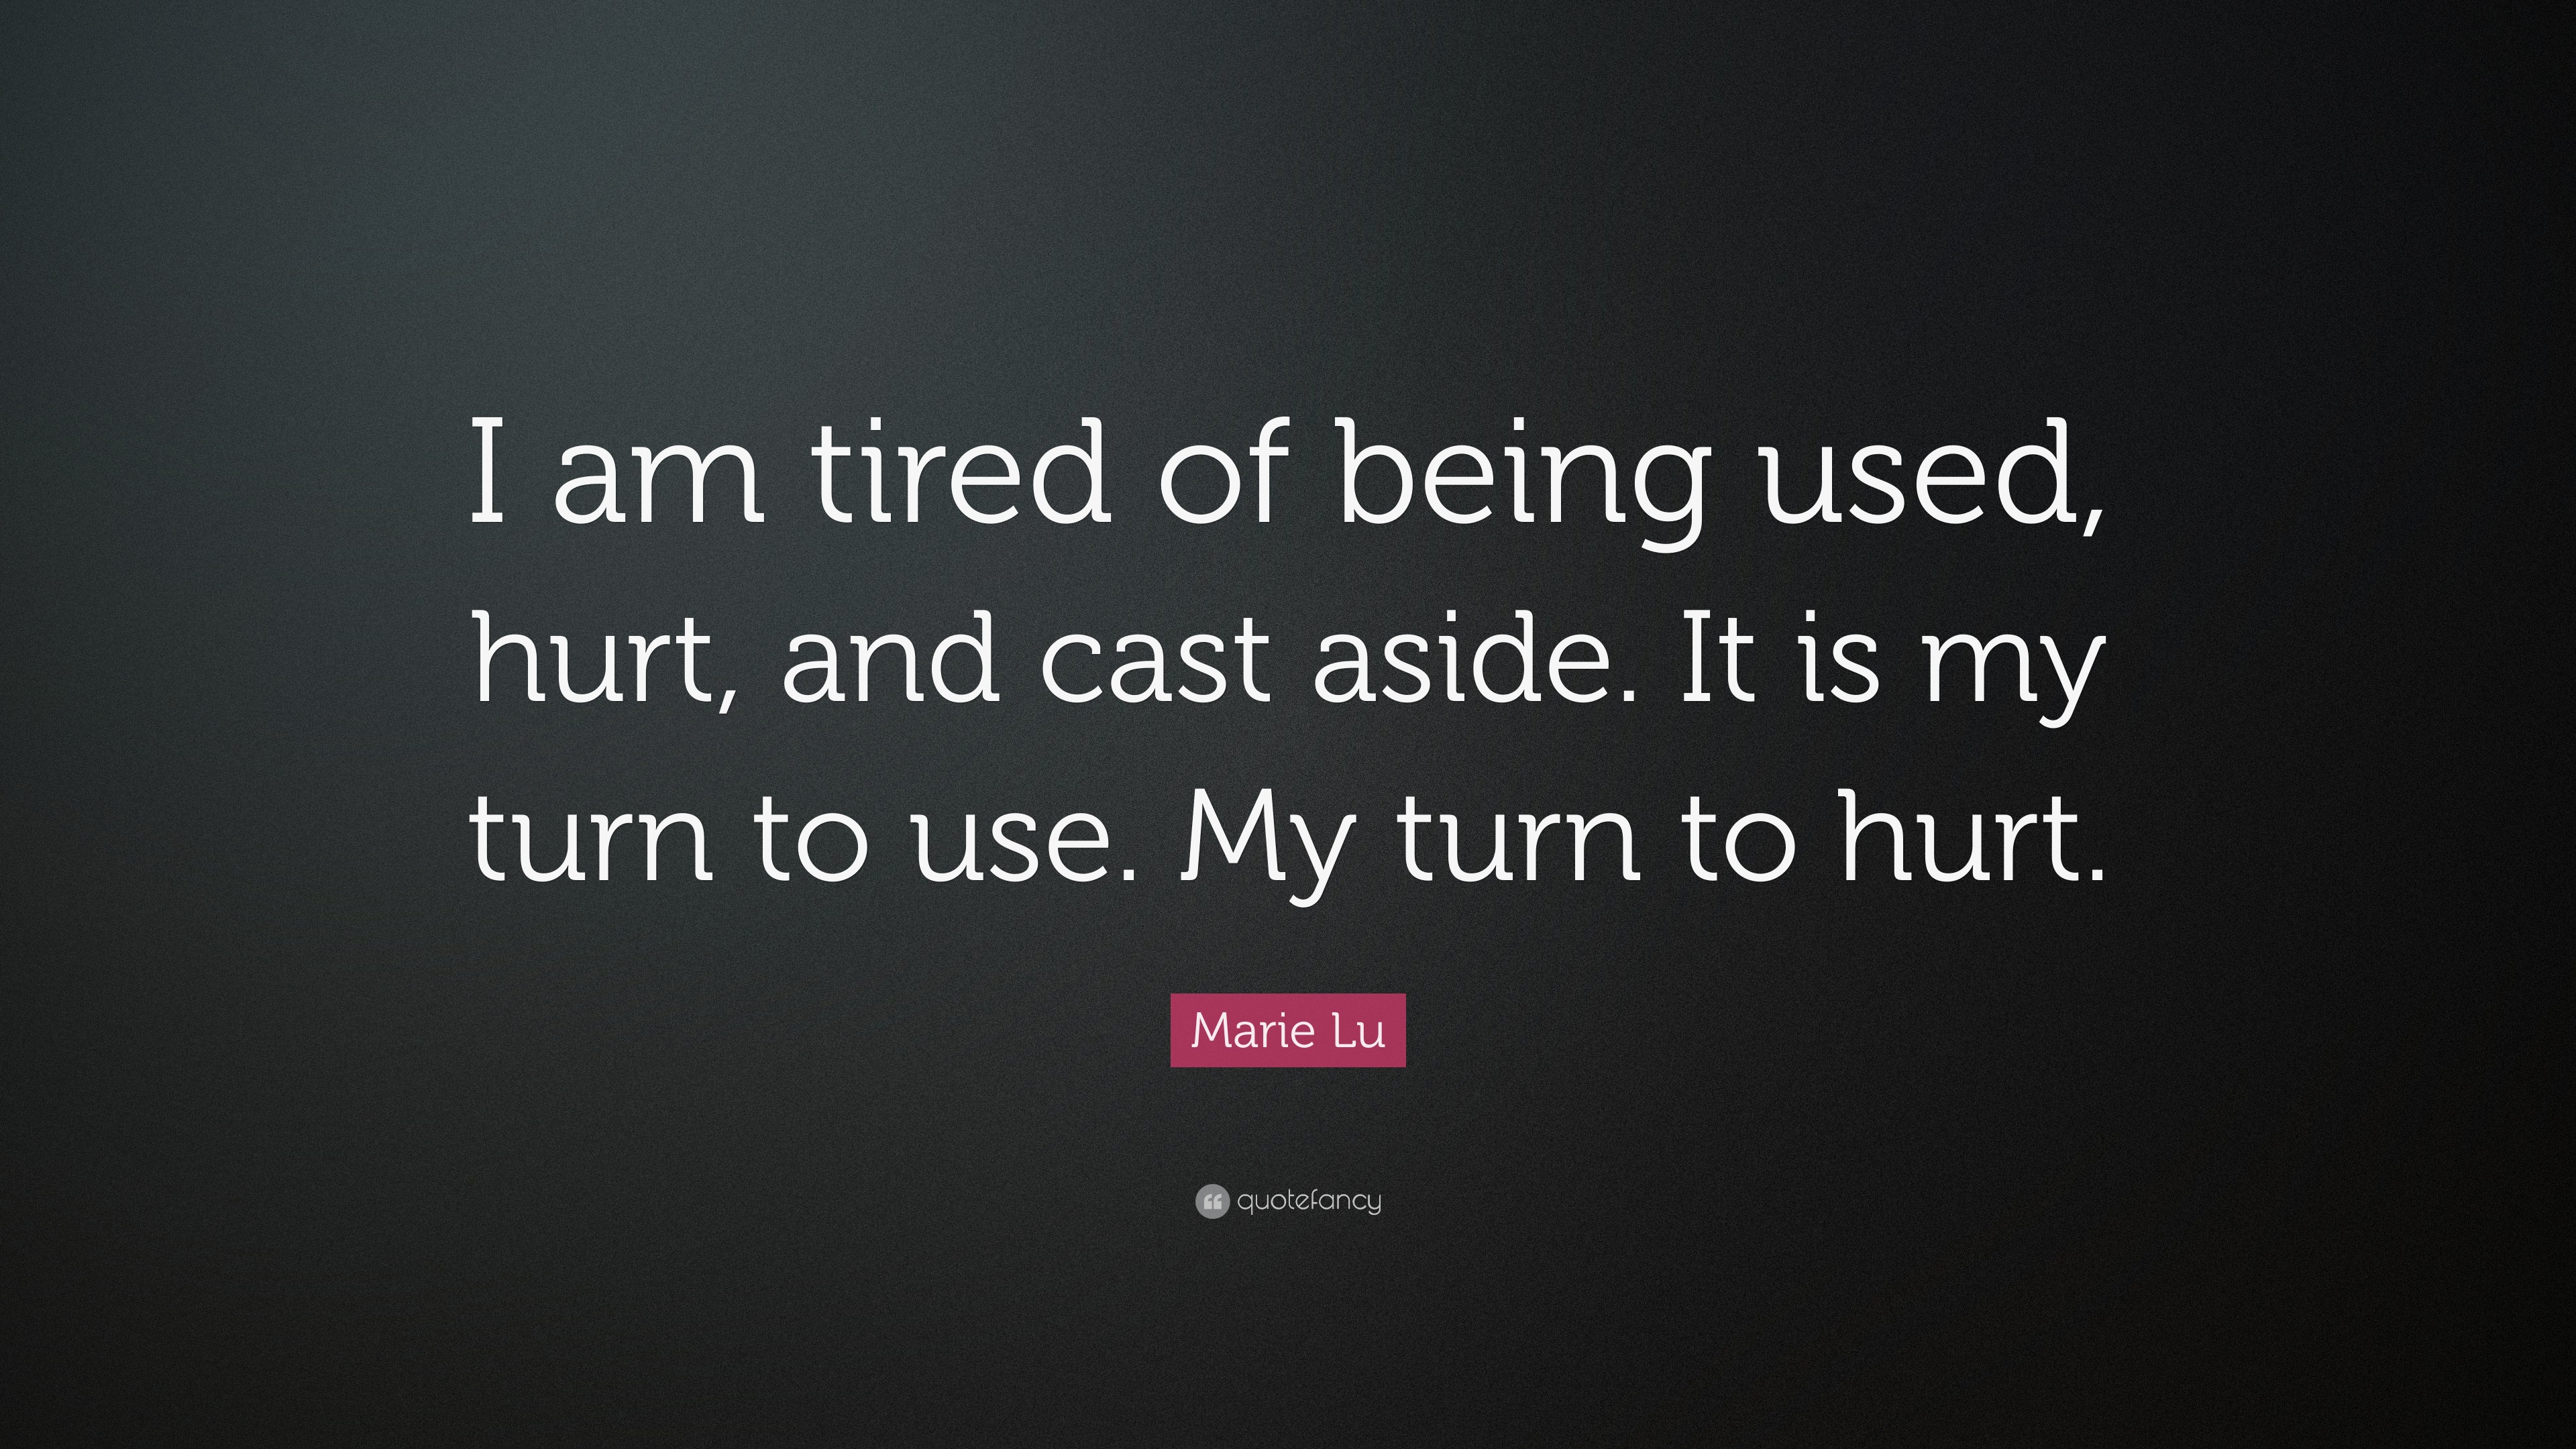 Marie Lu Quote: “I am tired of being used, hurt, and cast aside. It is